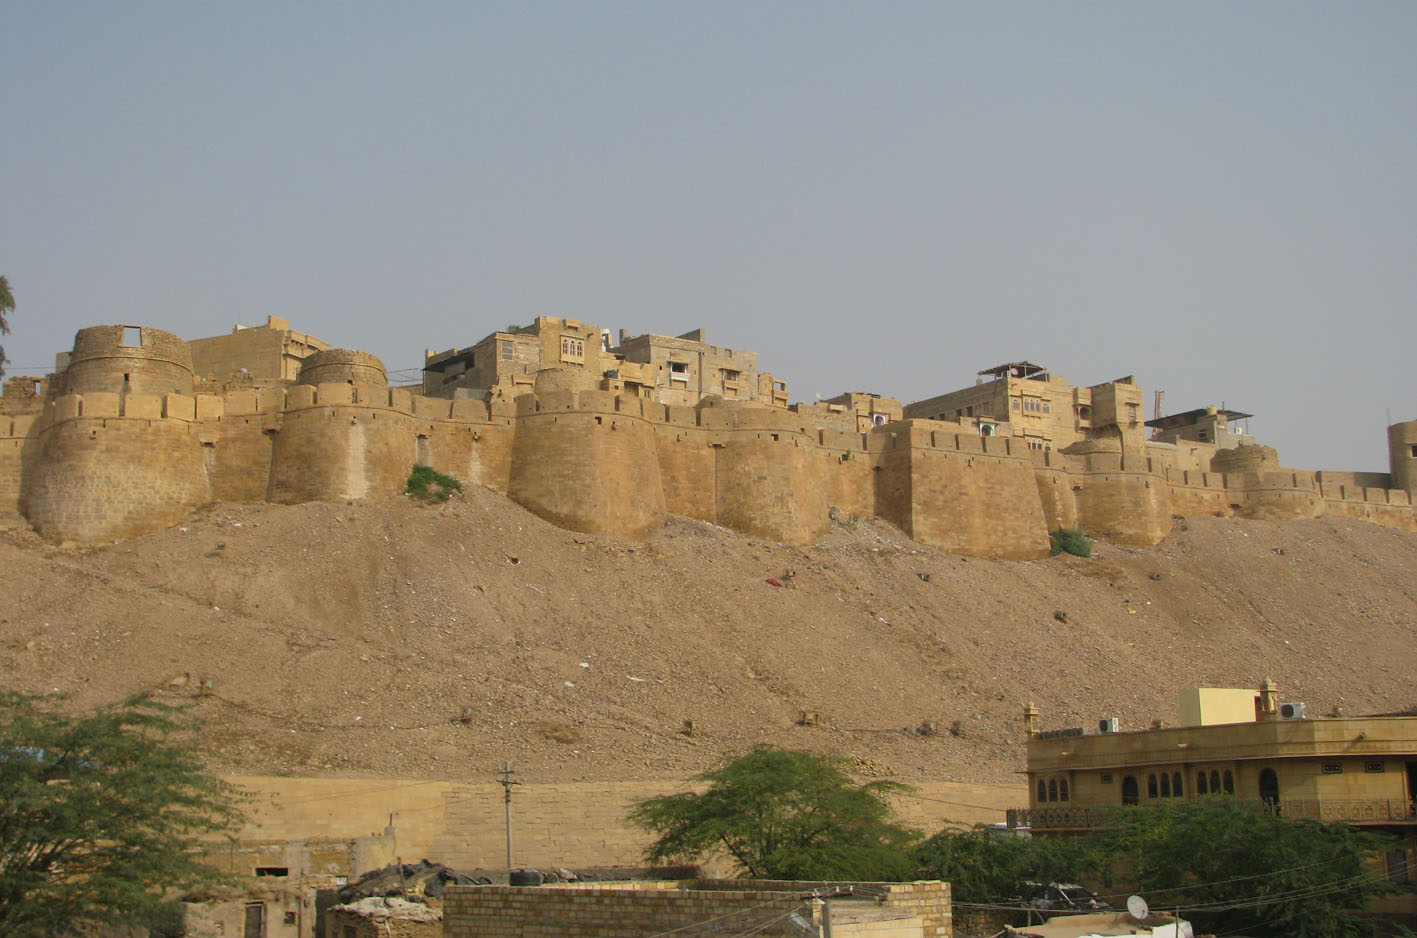 Jaisalmer – A short story by Kuthumi from his time living his enlightenment.